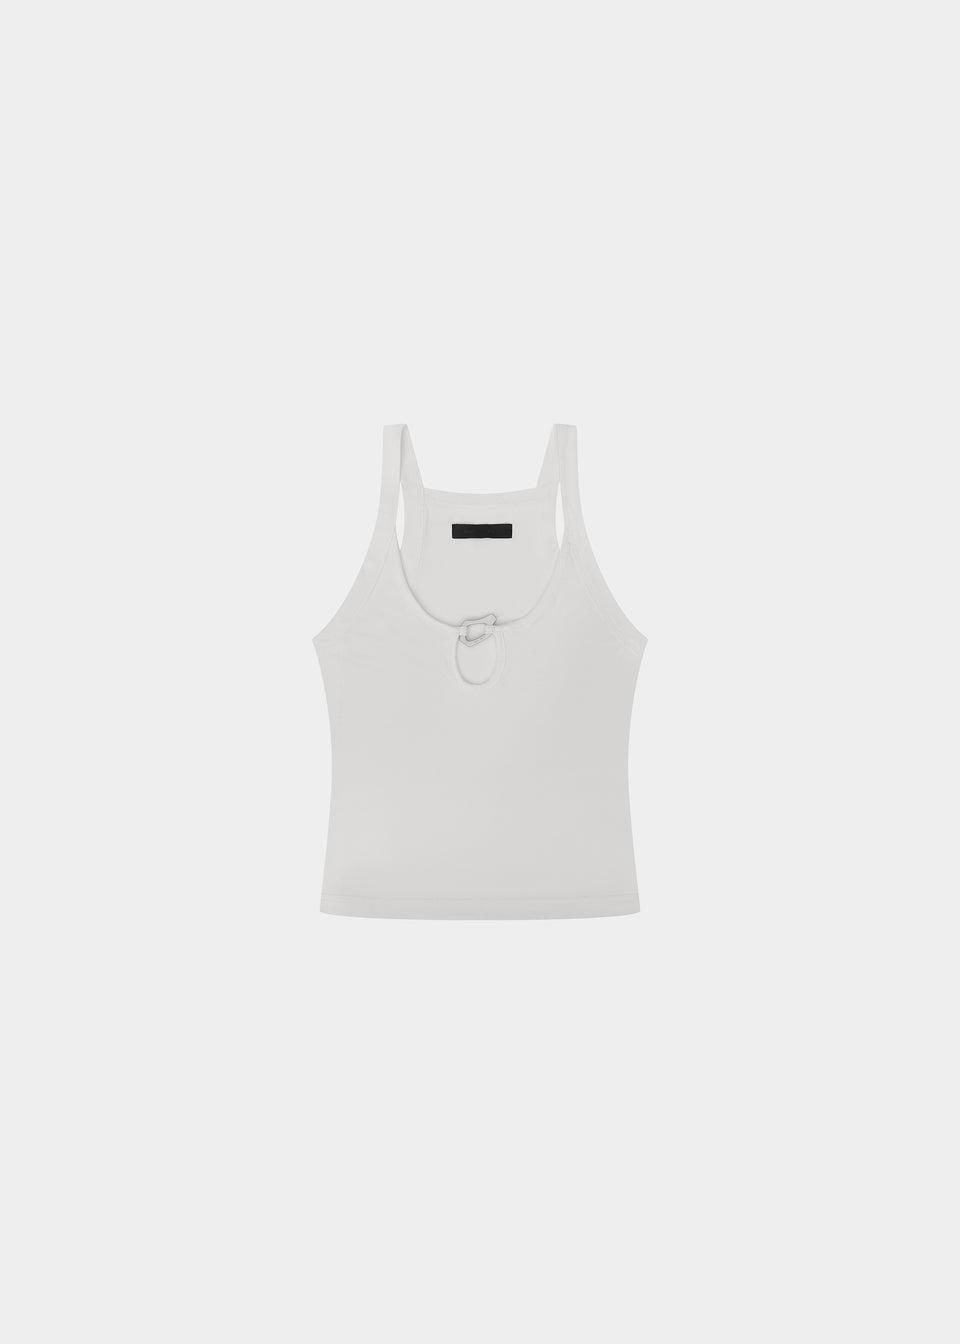 CONNIVENT TANK TOP by HELIOT EMIL